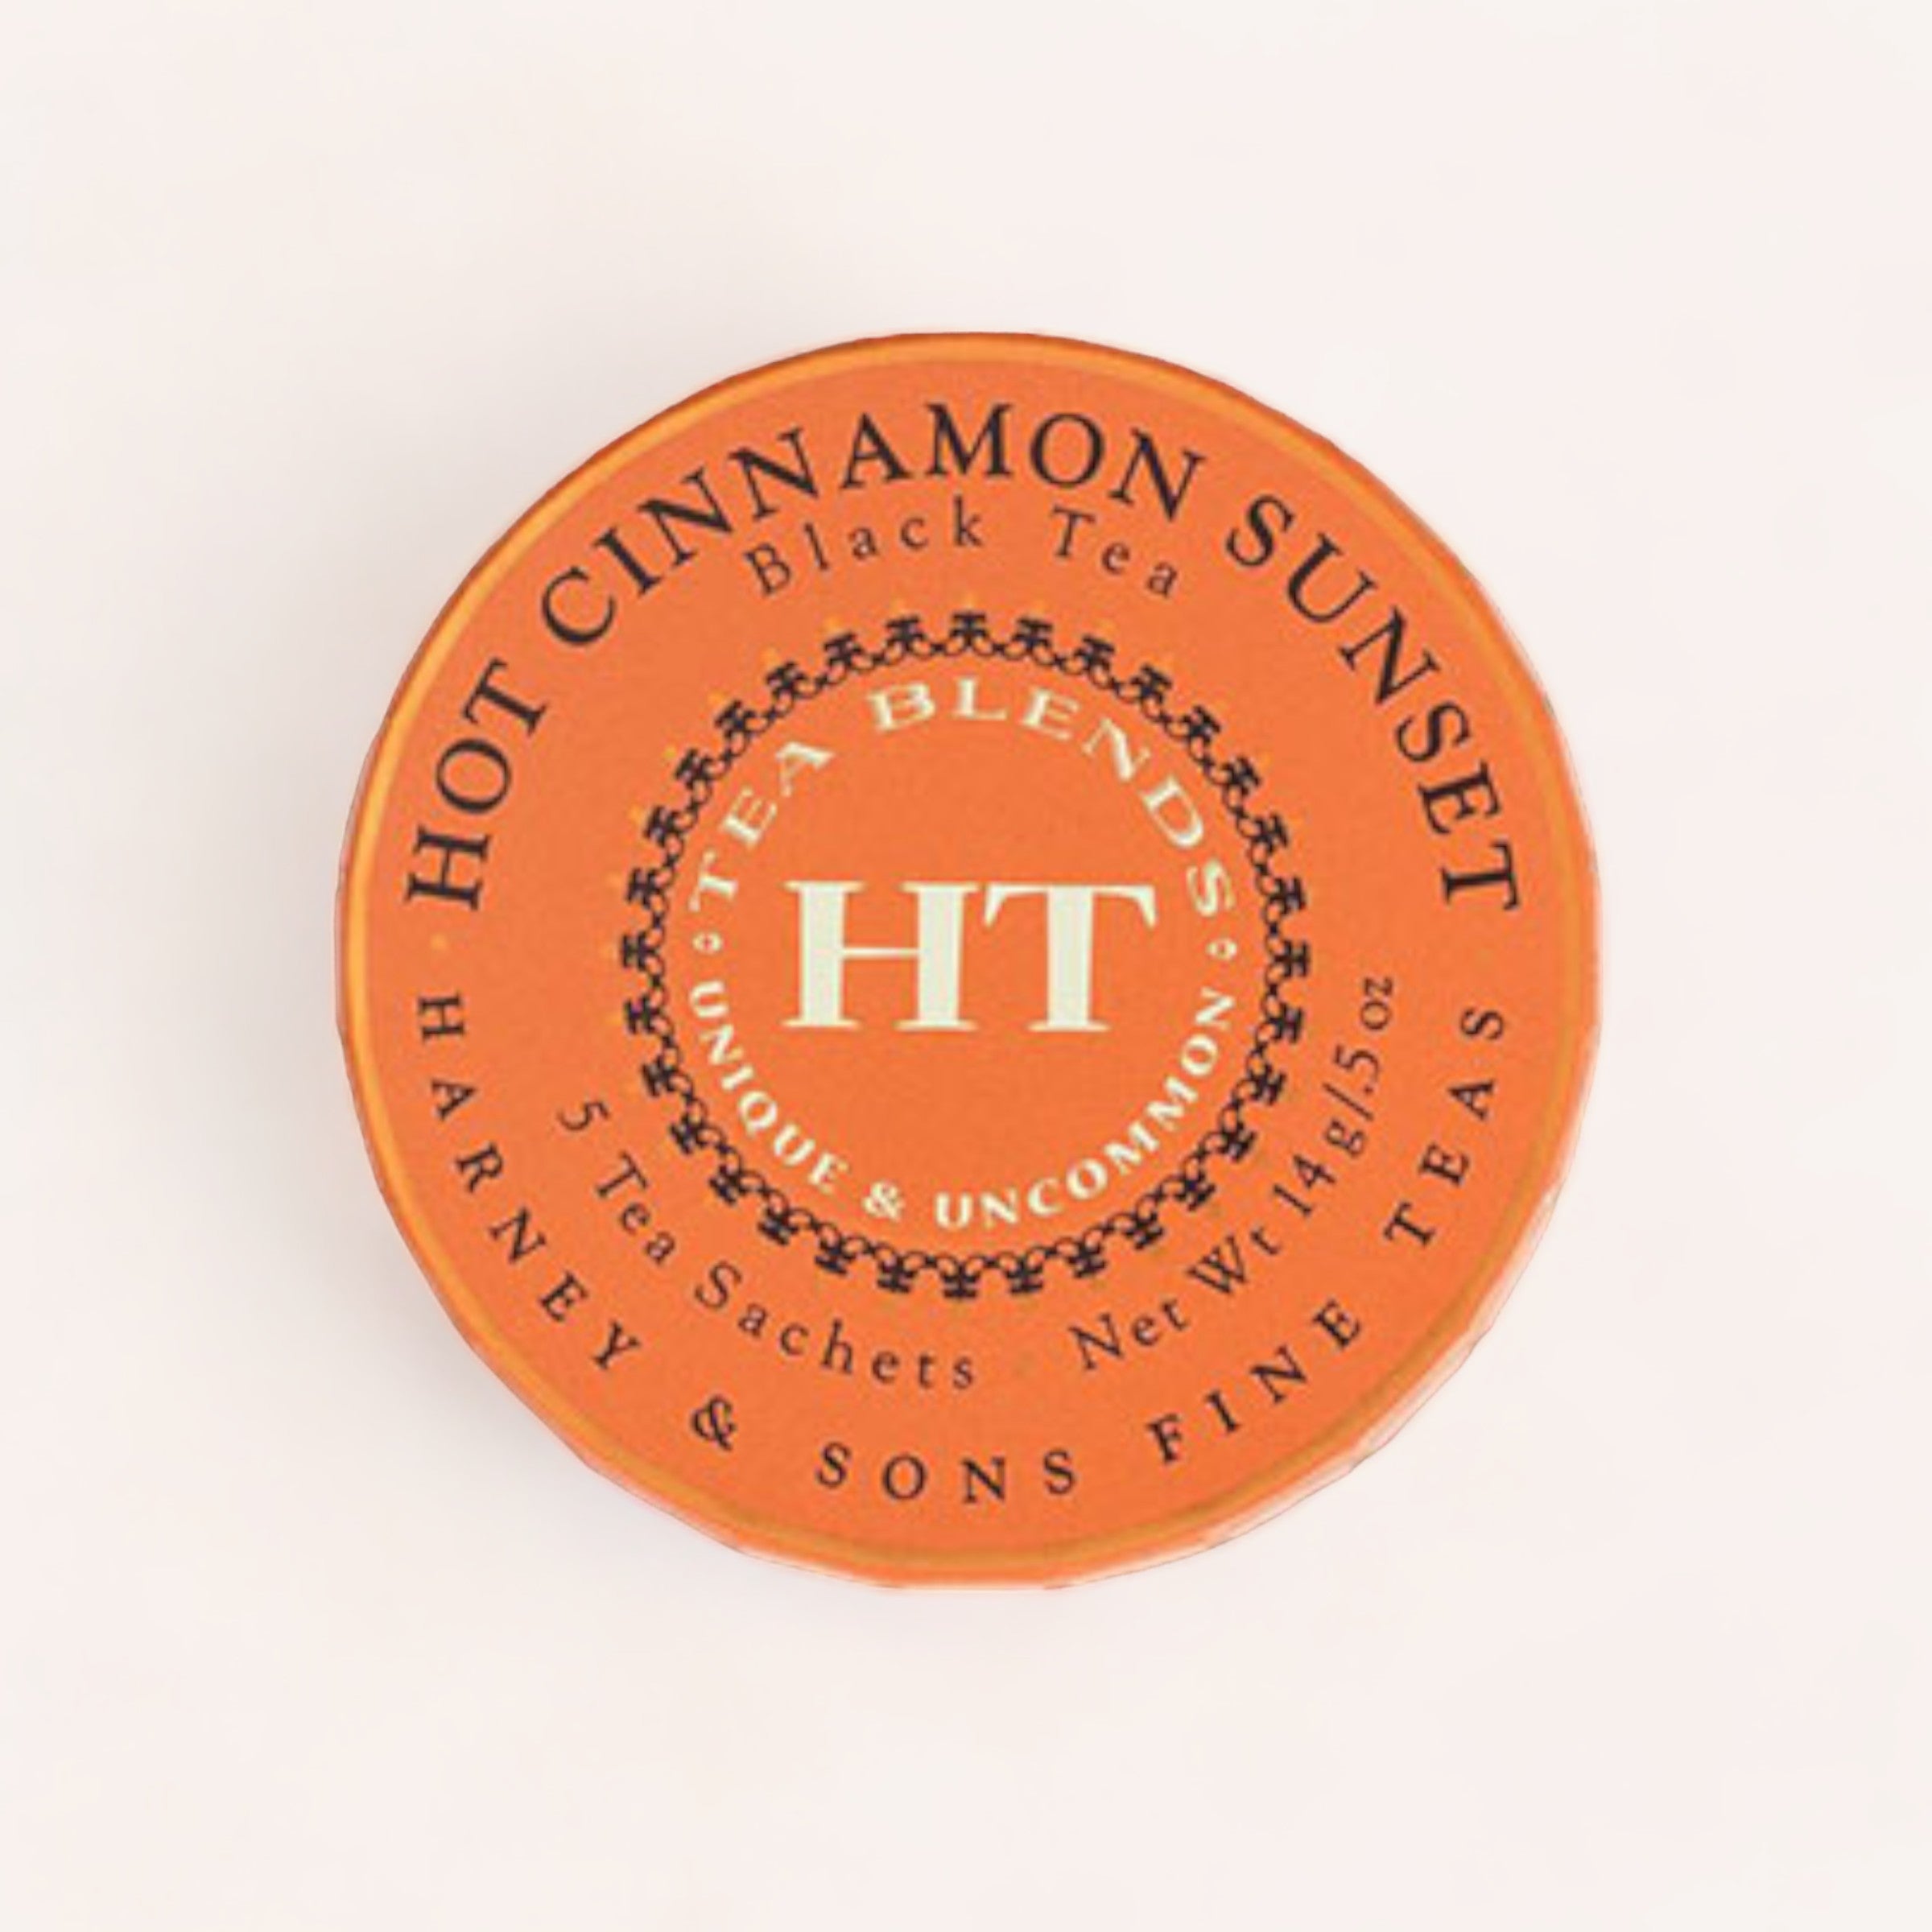 A round, orange tin lid labeled "Hot Cinnamon Sunset Tea Tagalong" from Harney & Sons, emphasizing its unique and uncommon loose leaf tea blend.